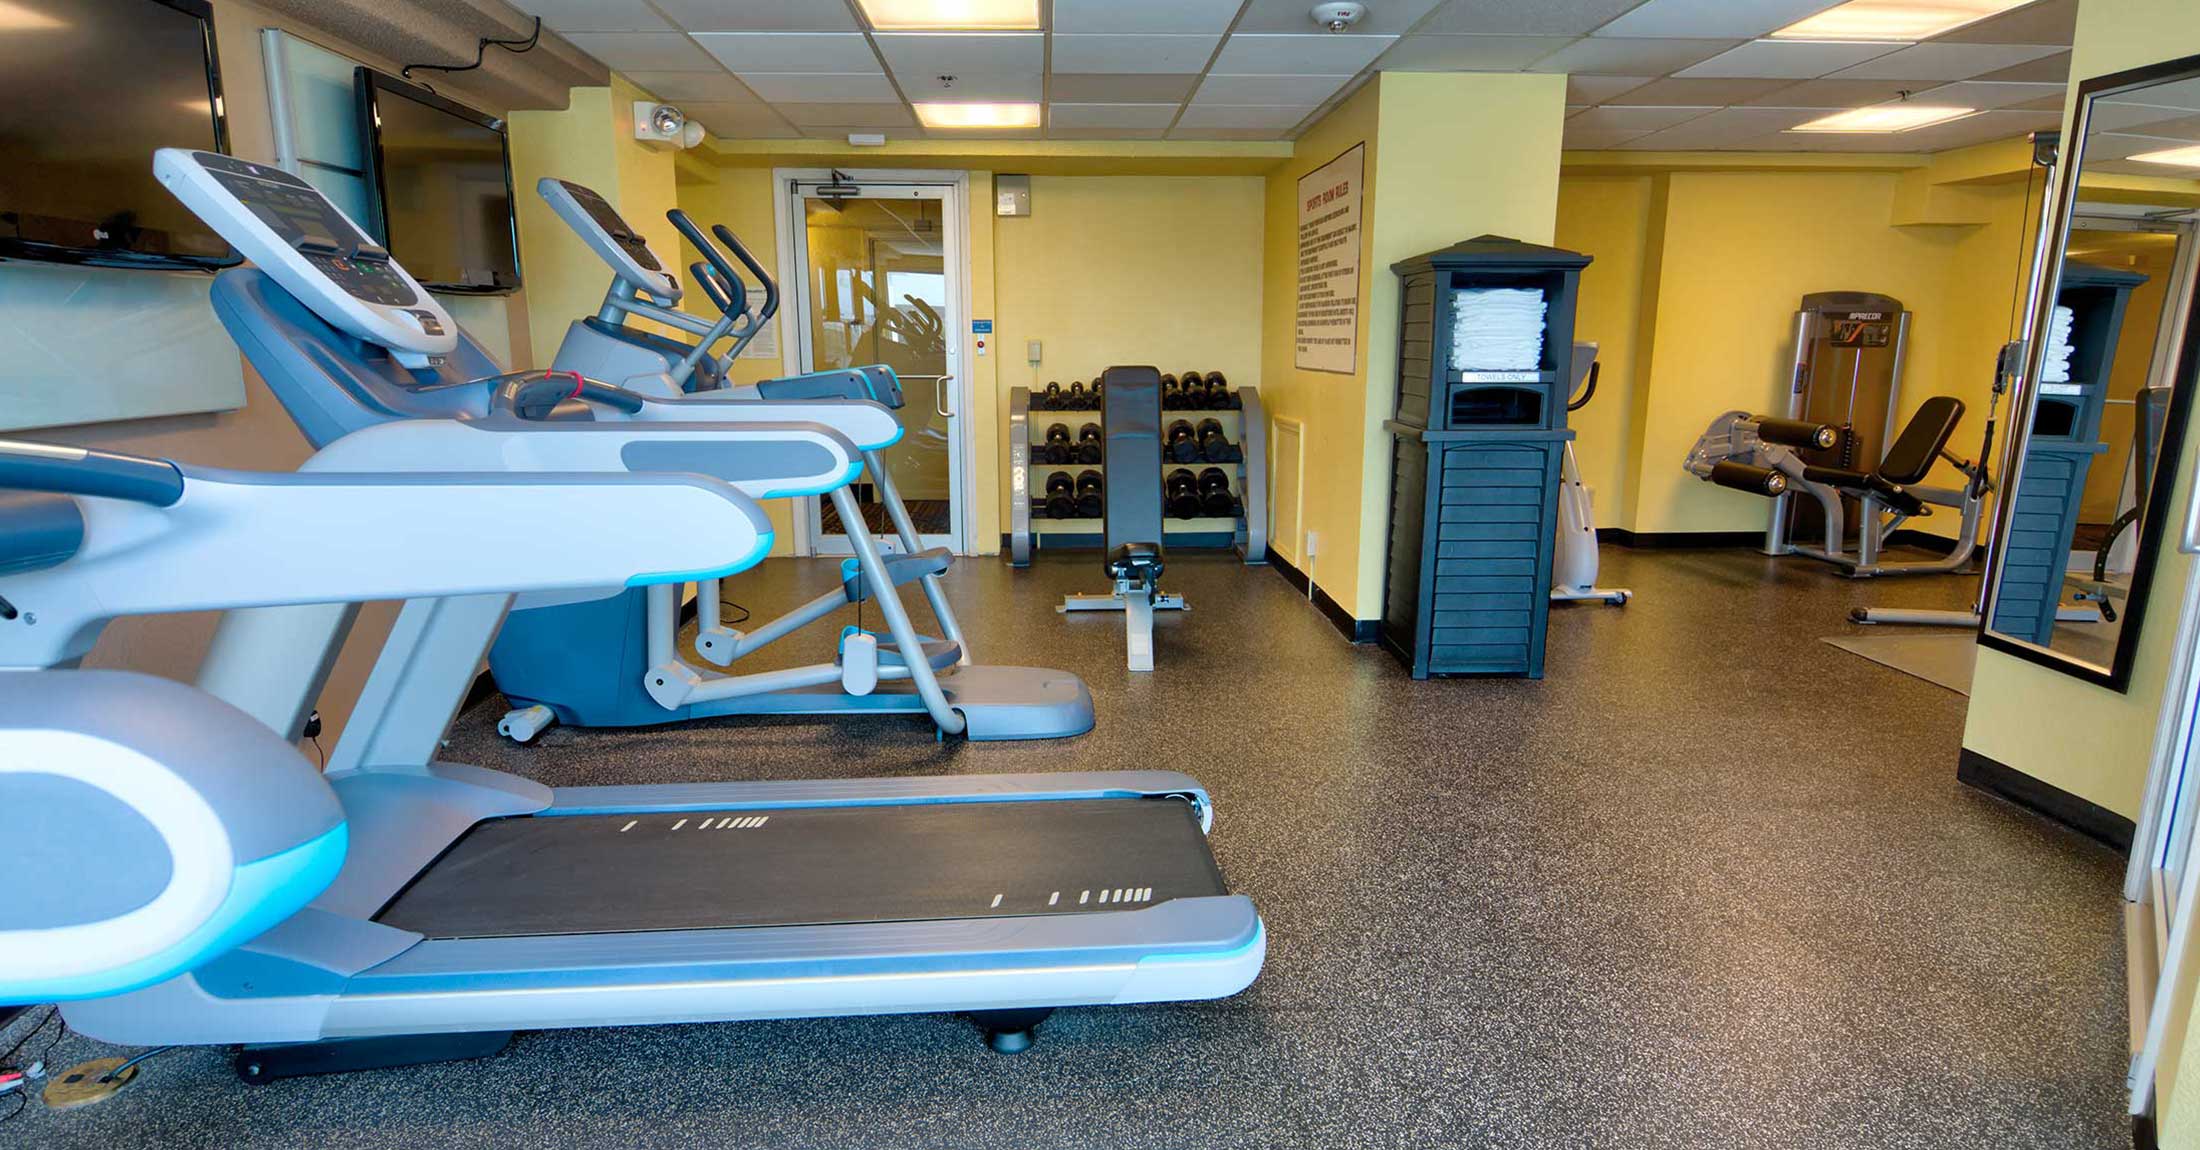 fitness center view from opposite side of room and treadmills